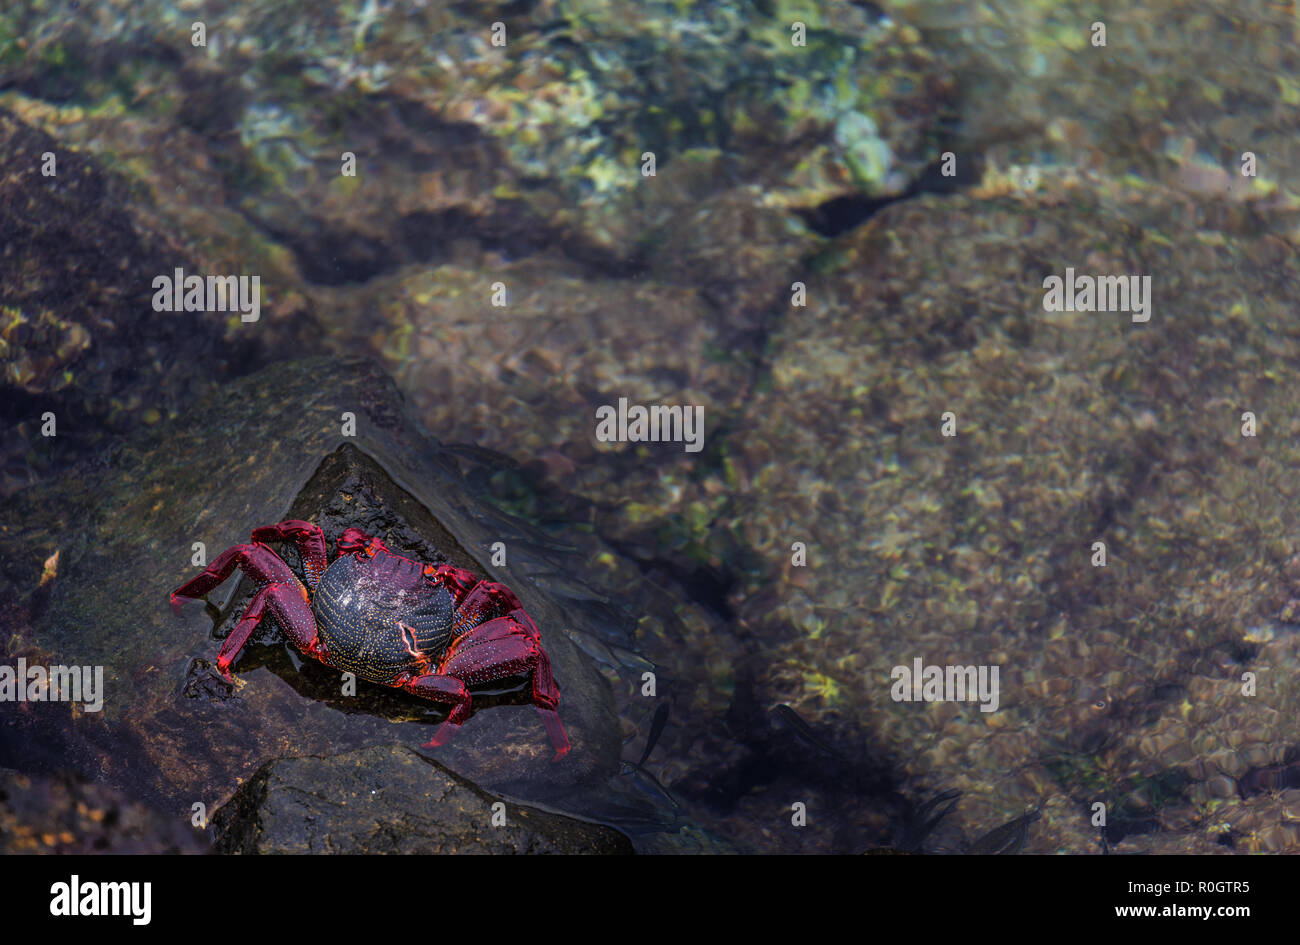 Red crab on black volcanic rock. Stock Photo